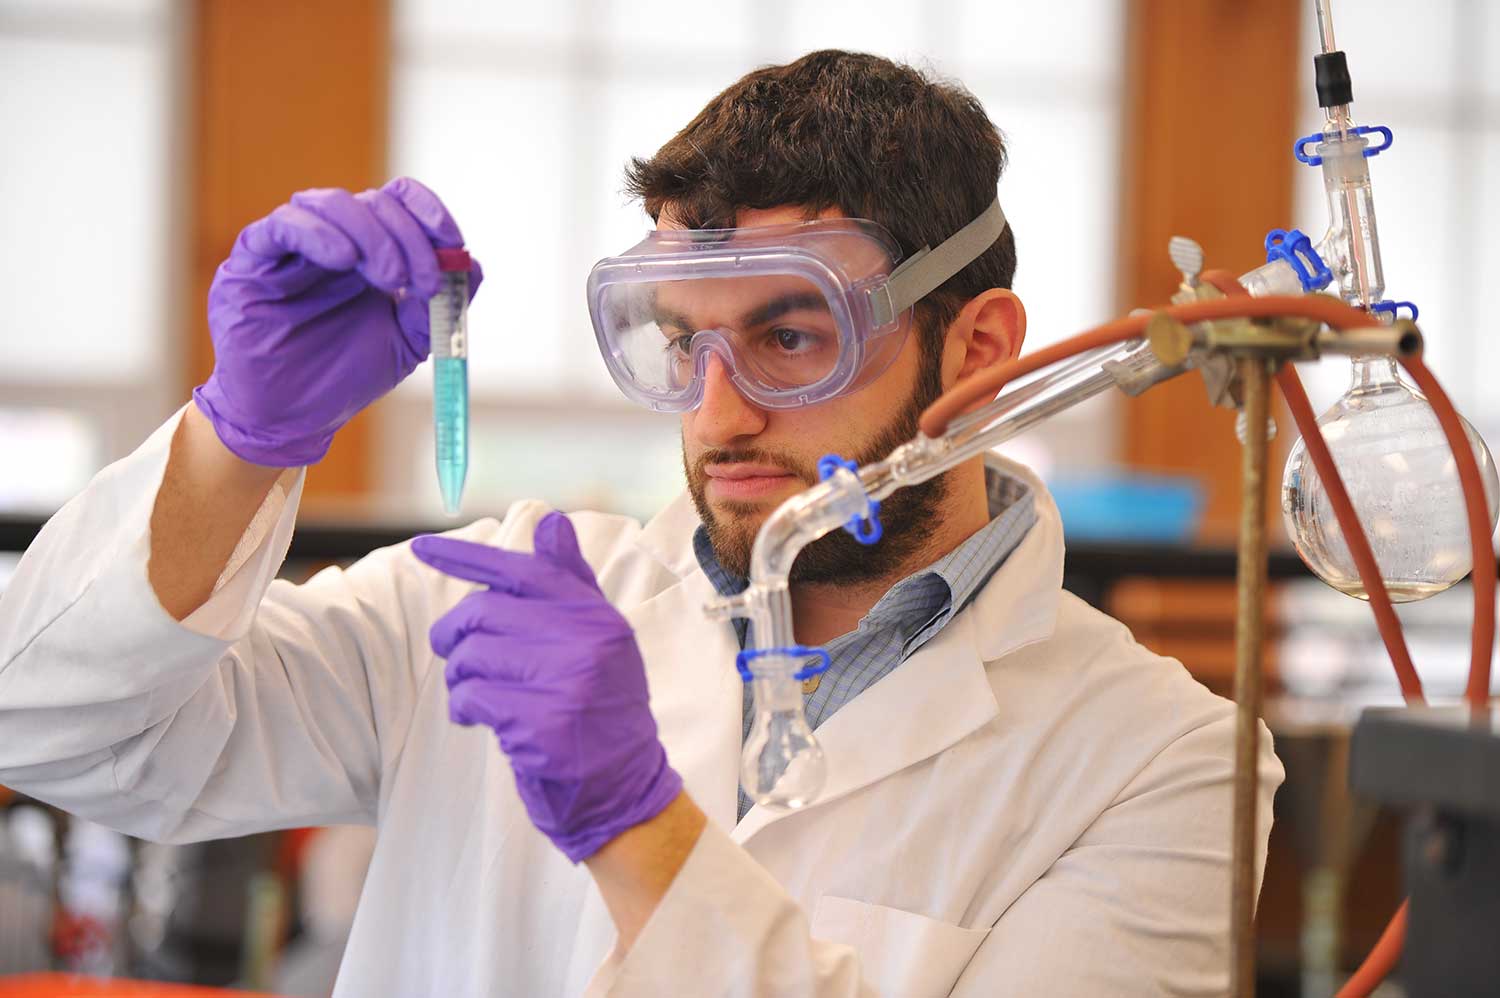 Chemistry Degree students participate in research projects